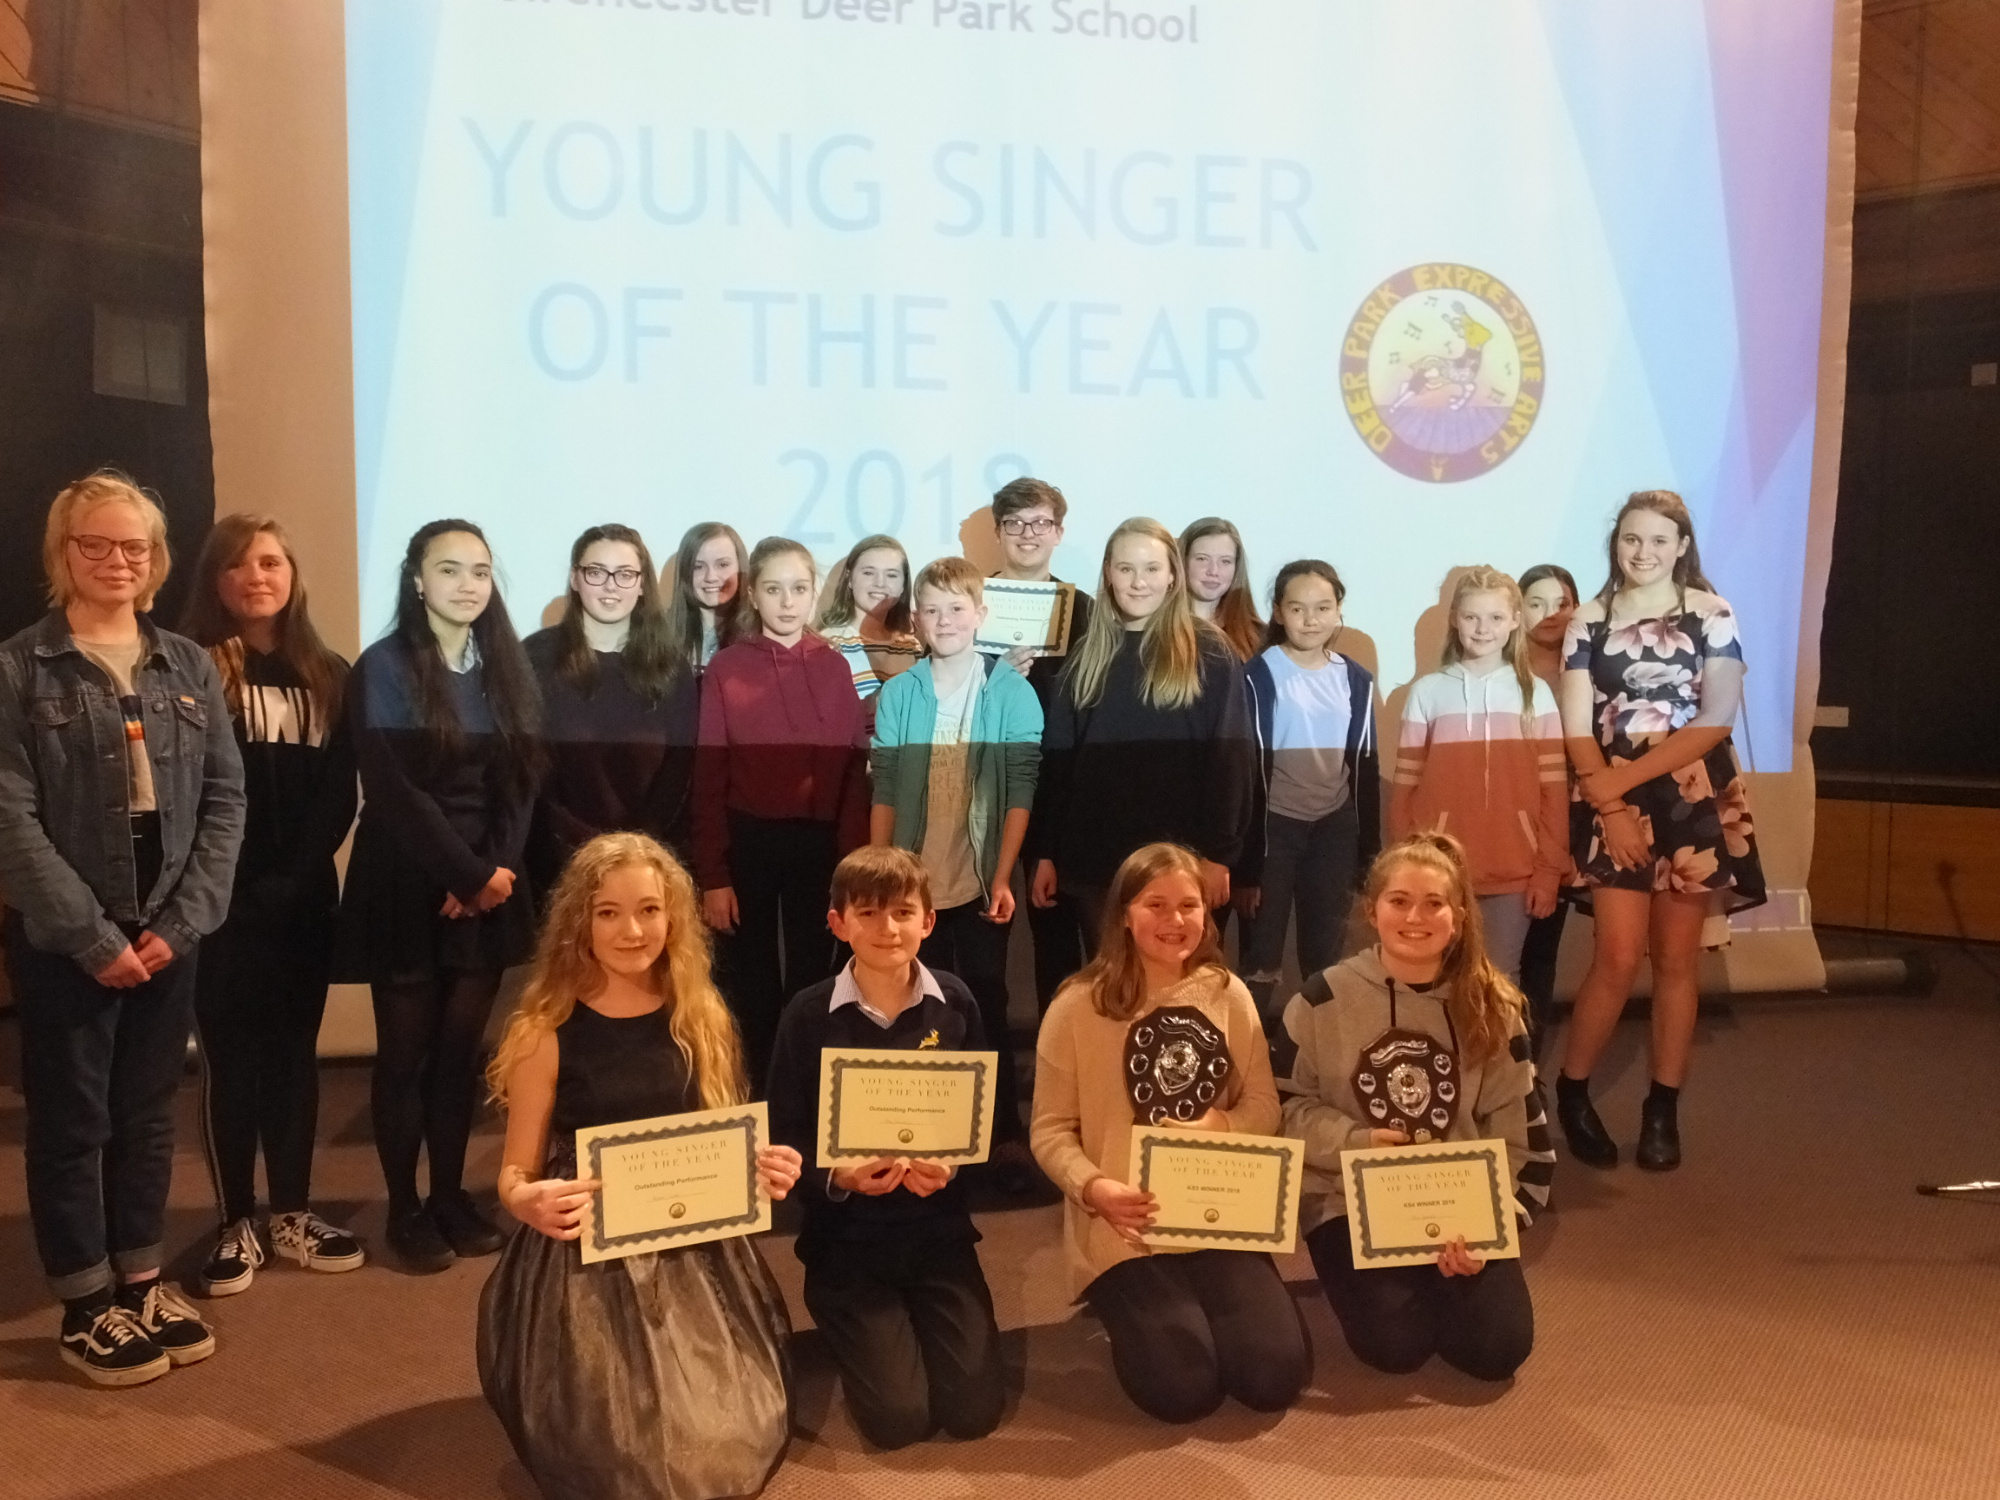 Young Singer of the Year 2018